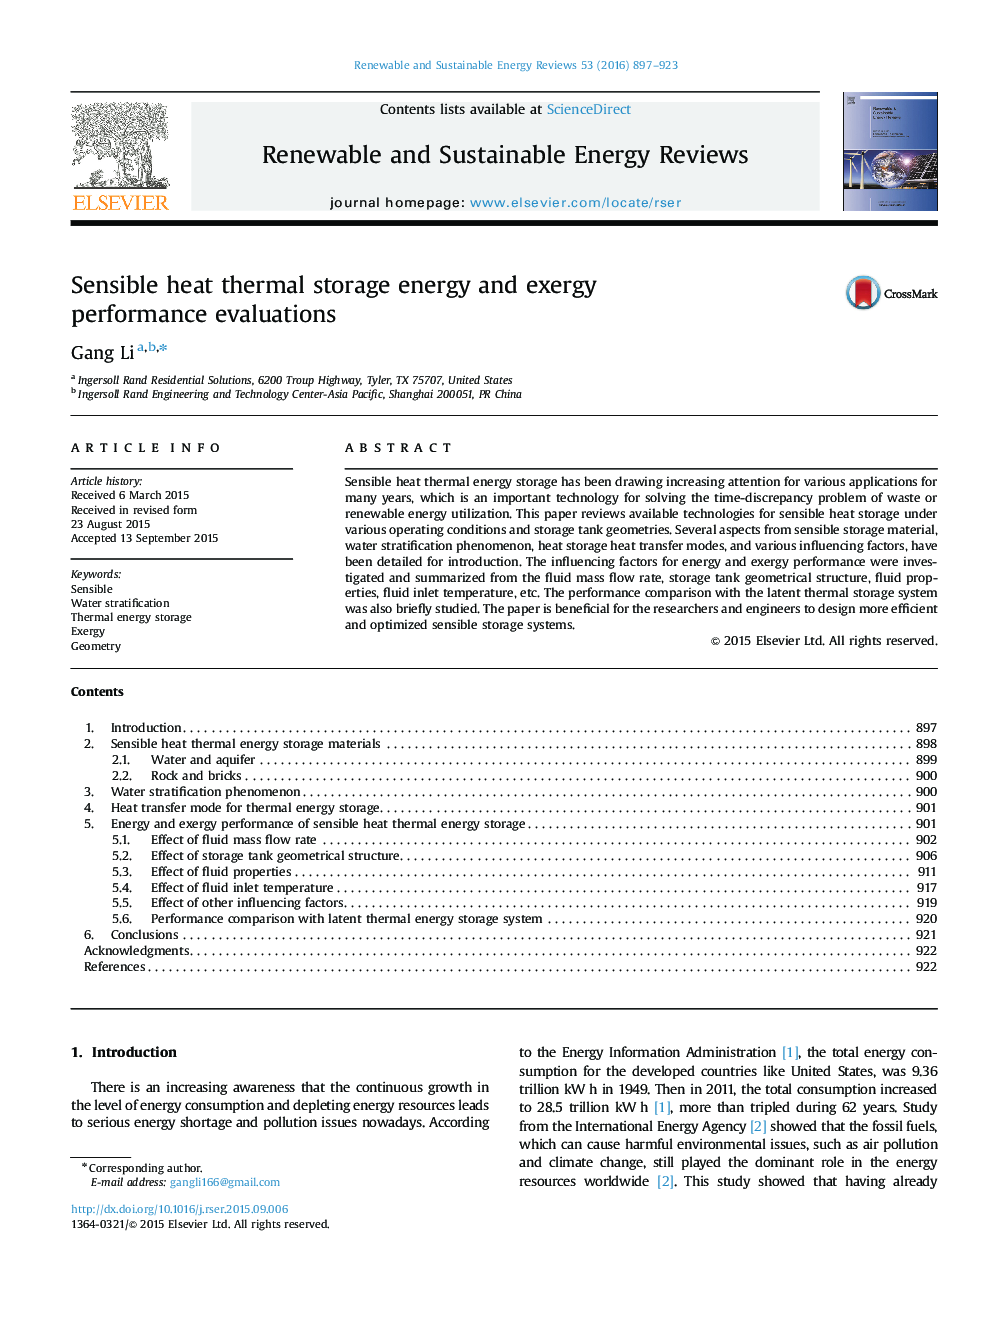 Sensible heat thermal storage energy and exergy performance evaluations